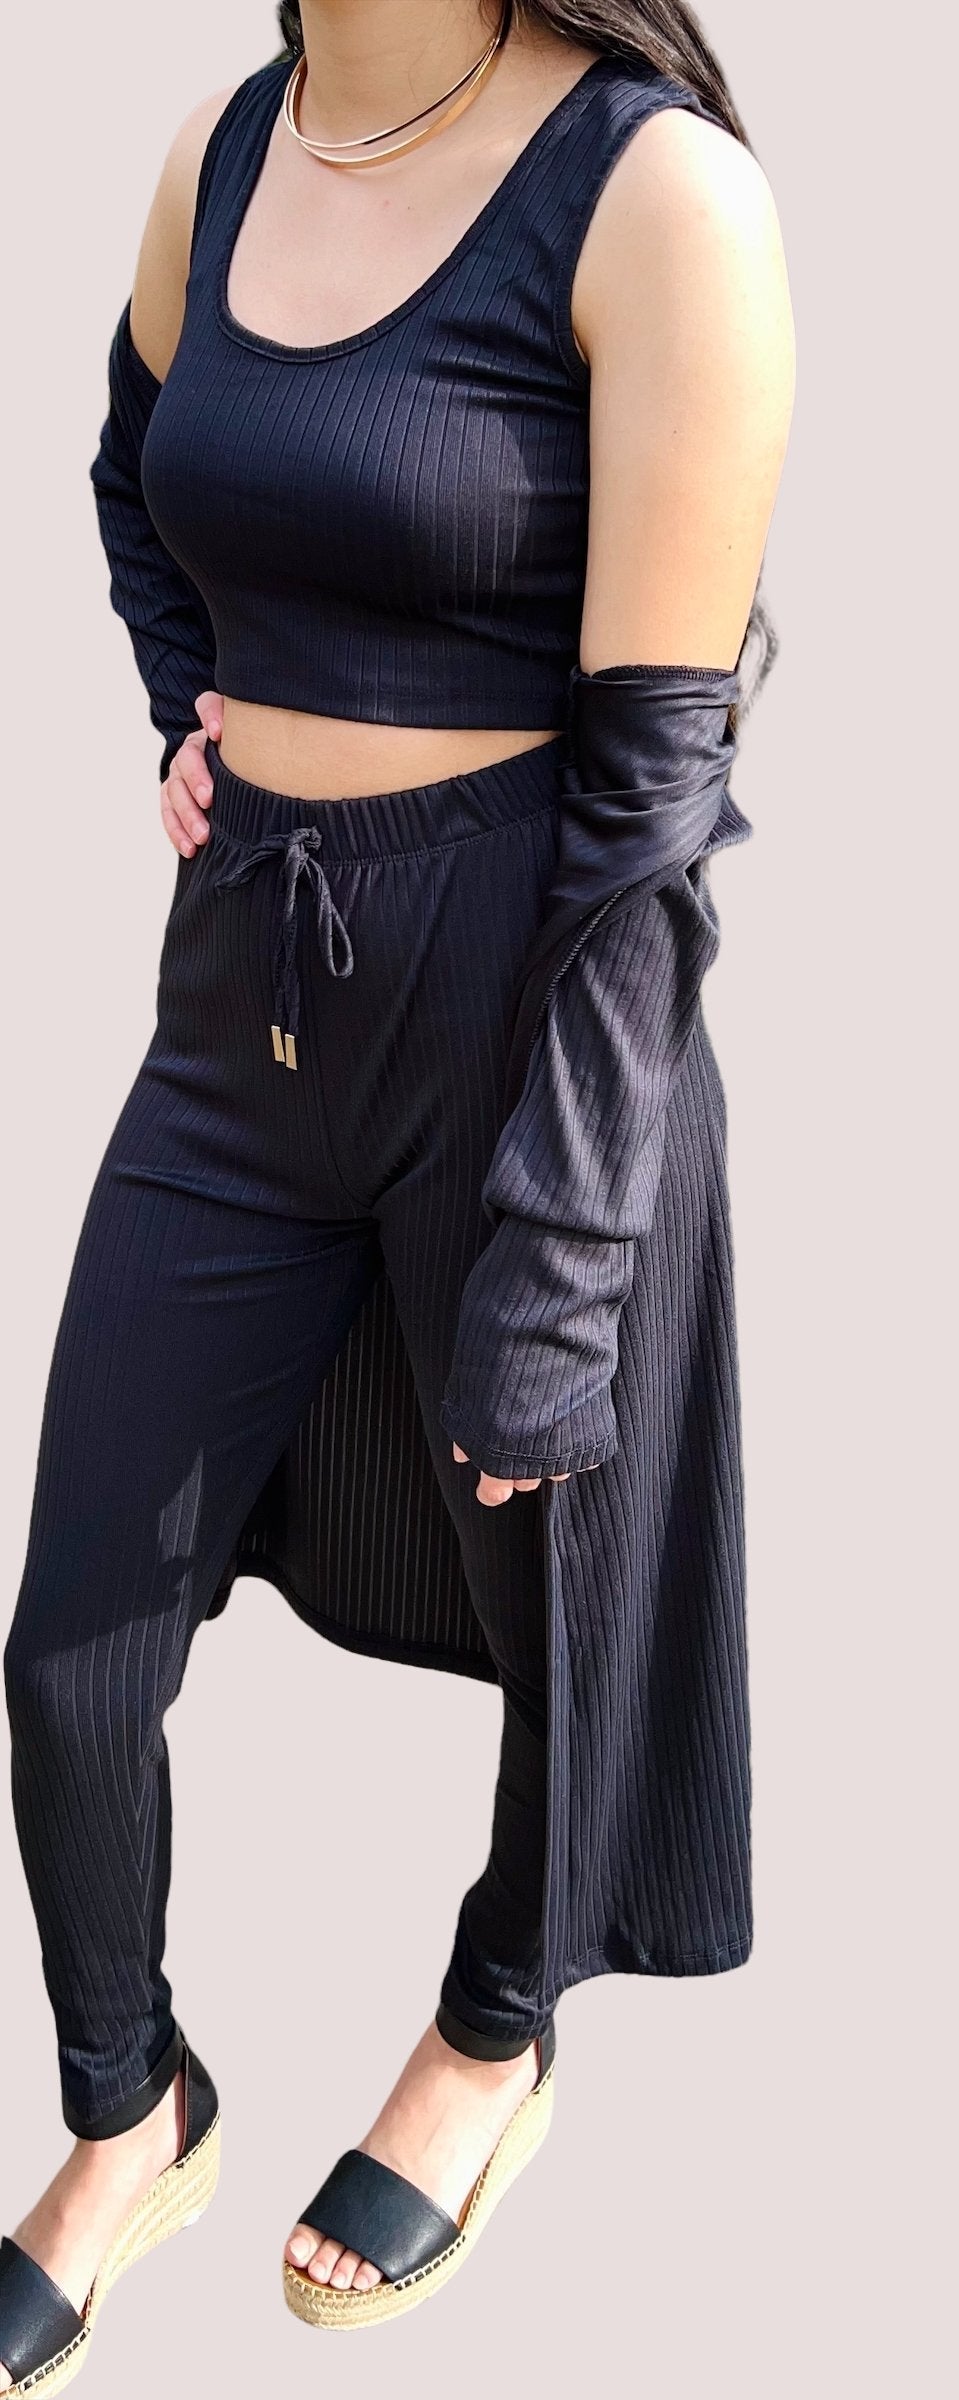 Slate Stretch Pants - Offbeat Boutique